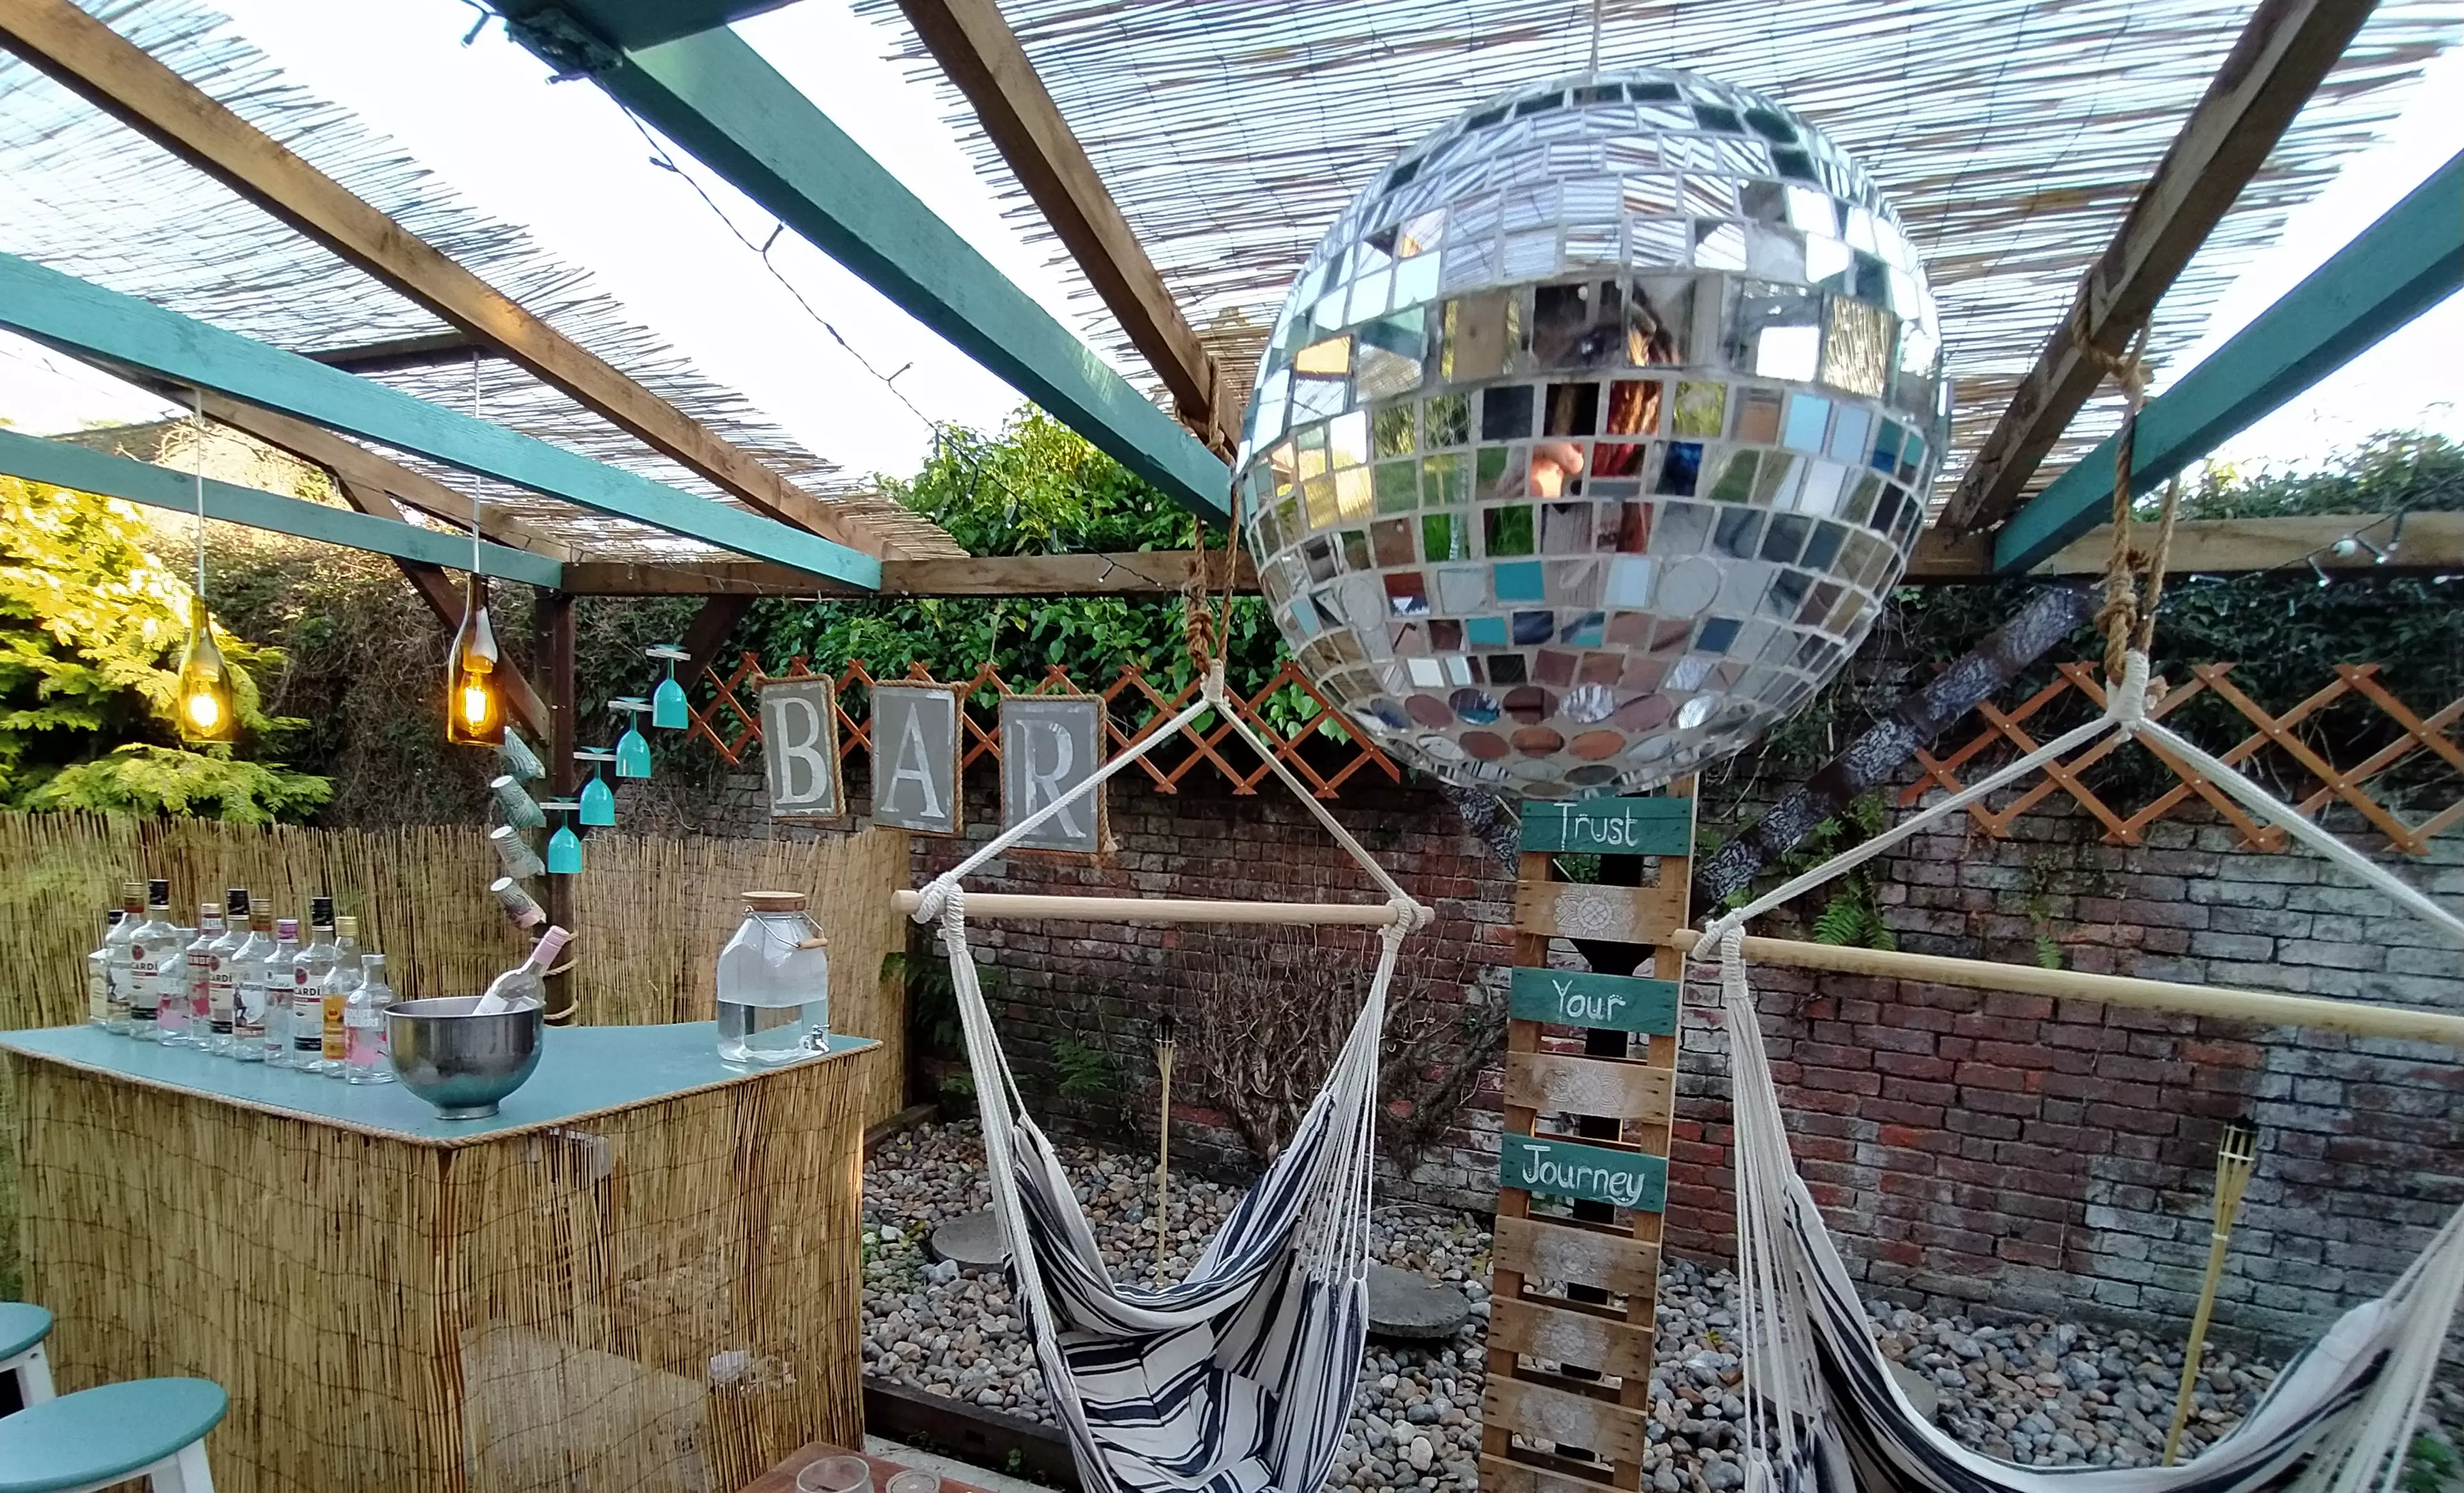 A re-glued disco ball adds a finishing touch (